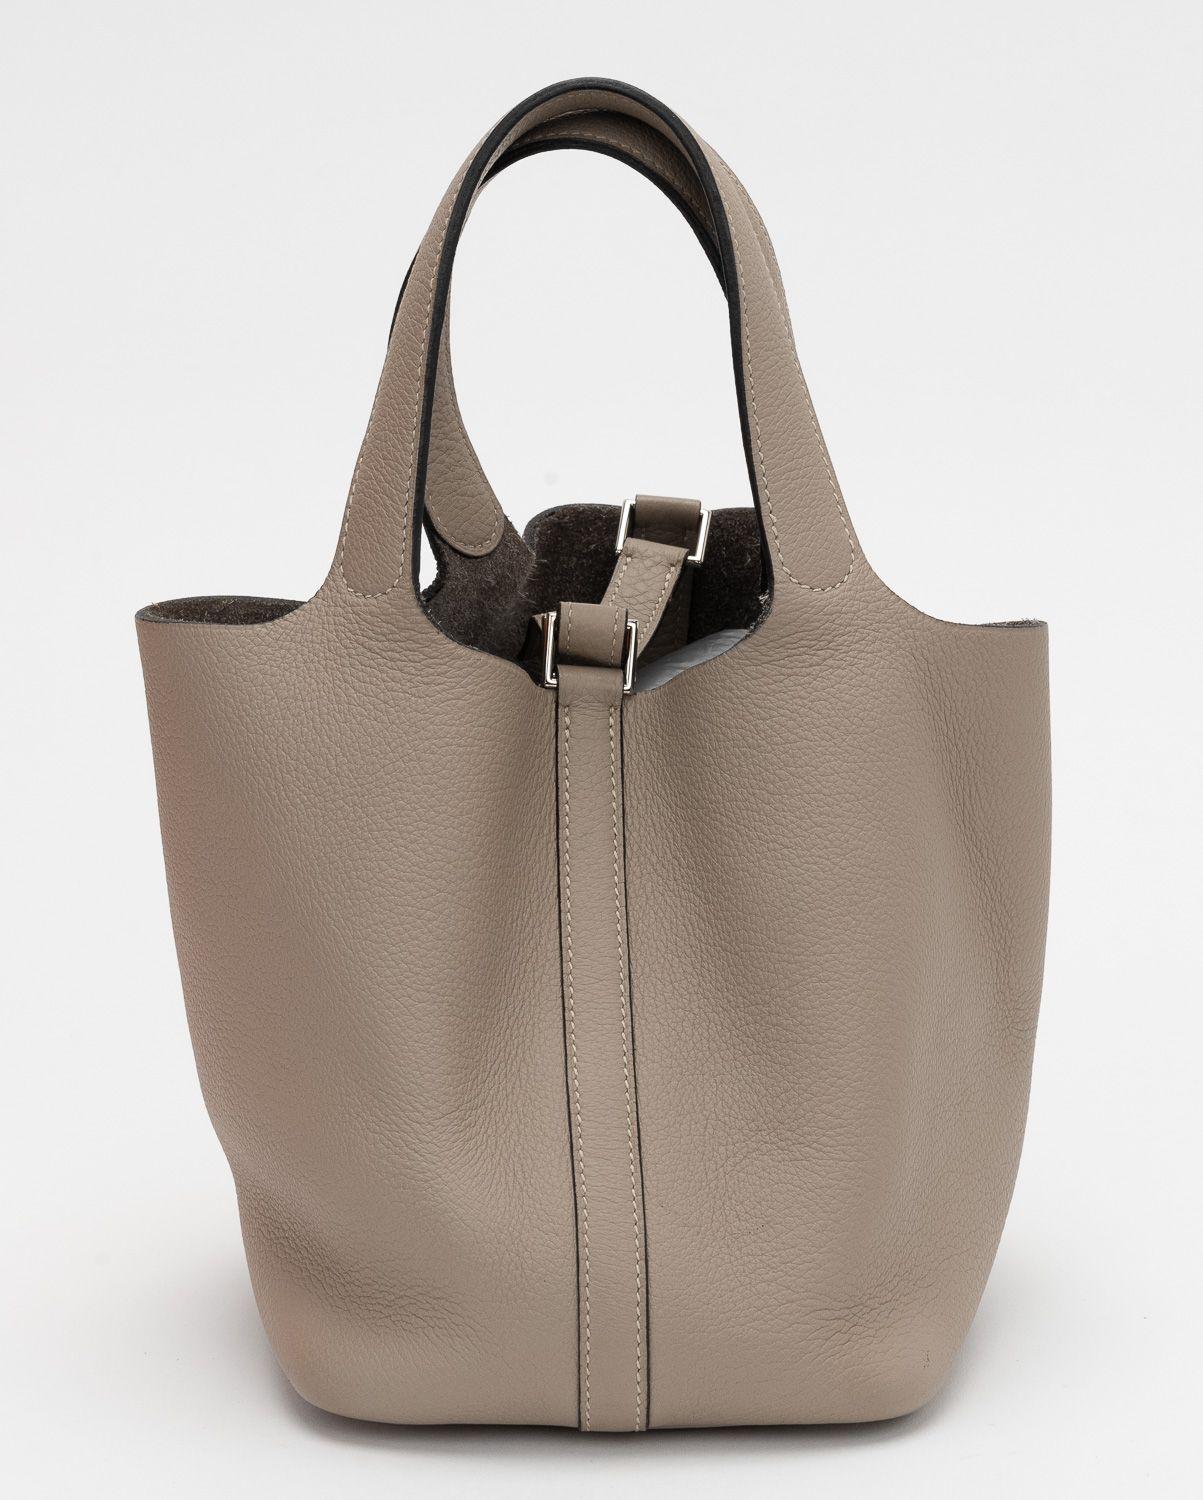 Picotin tote bag from Hermès Pre-Owned featuring gris tortorelle, Taurillon Clemence leather, two flat top handles and metal feet. It's in excellent condition nearly perfect. The handles drop is 6' and the bag comes with the original box.